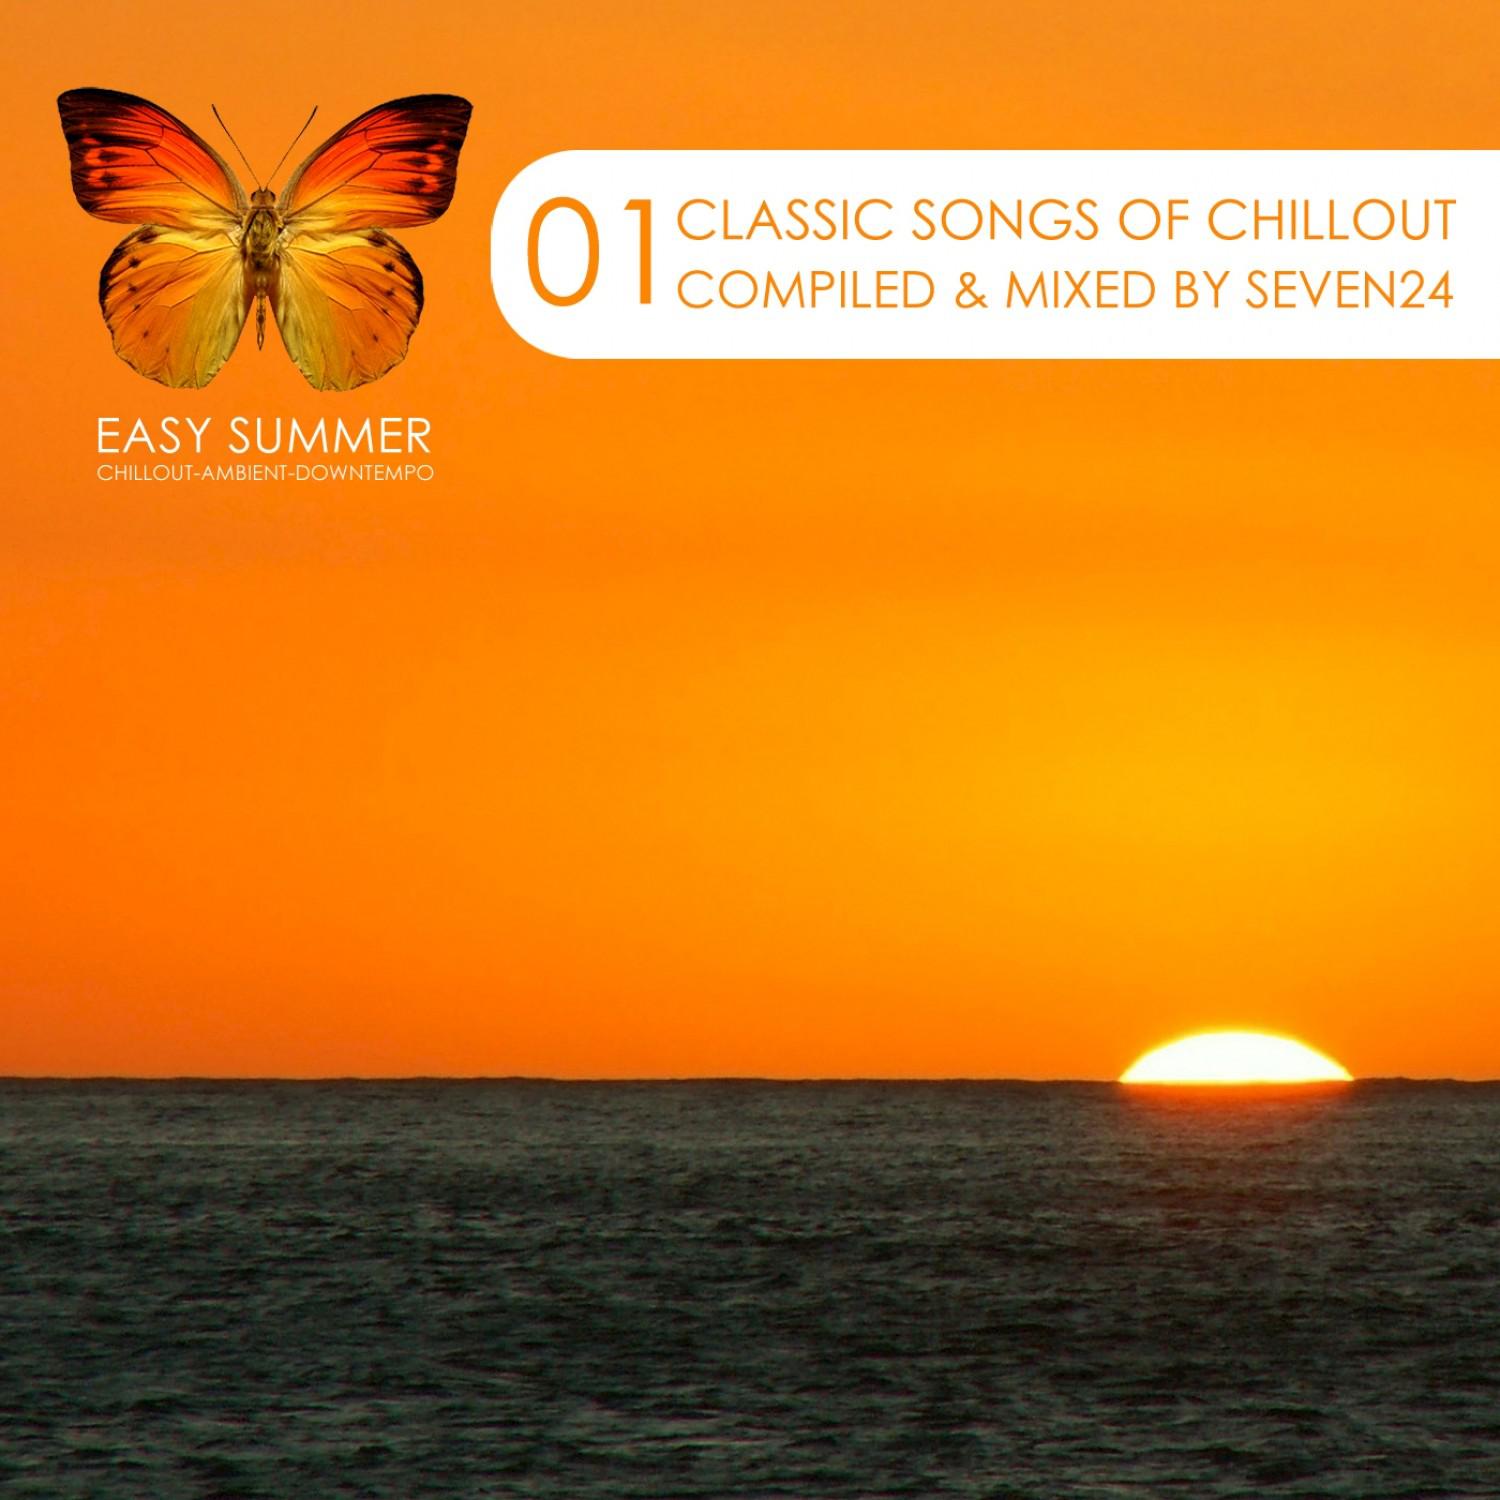 Classic Songs of Chillout 01 (Continuous Dj Mix)